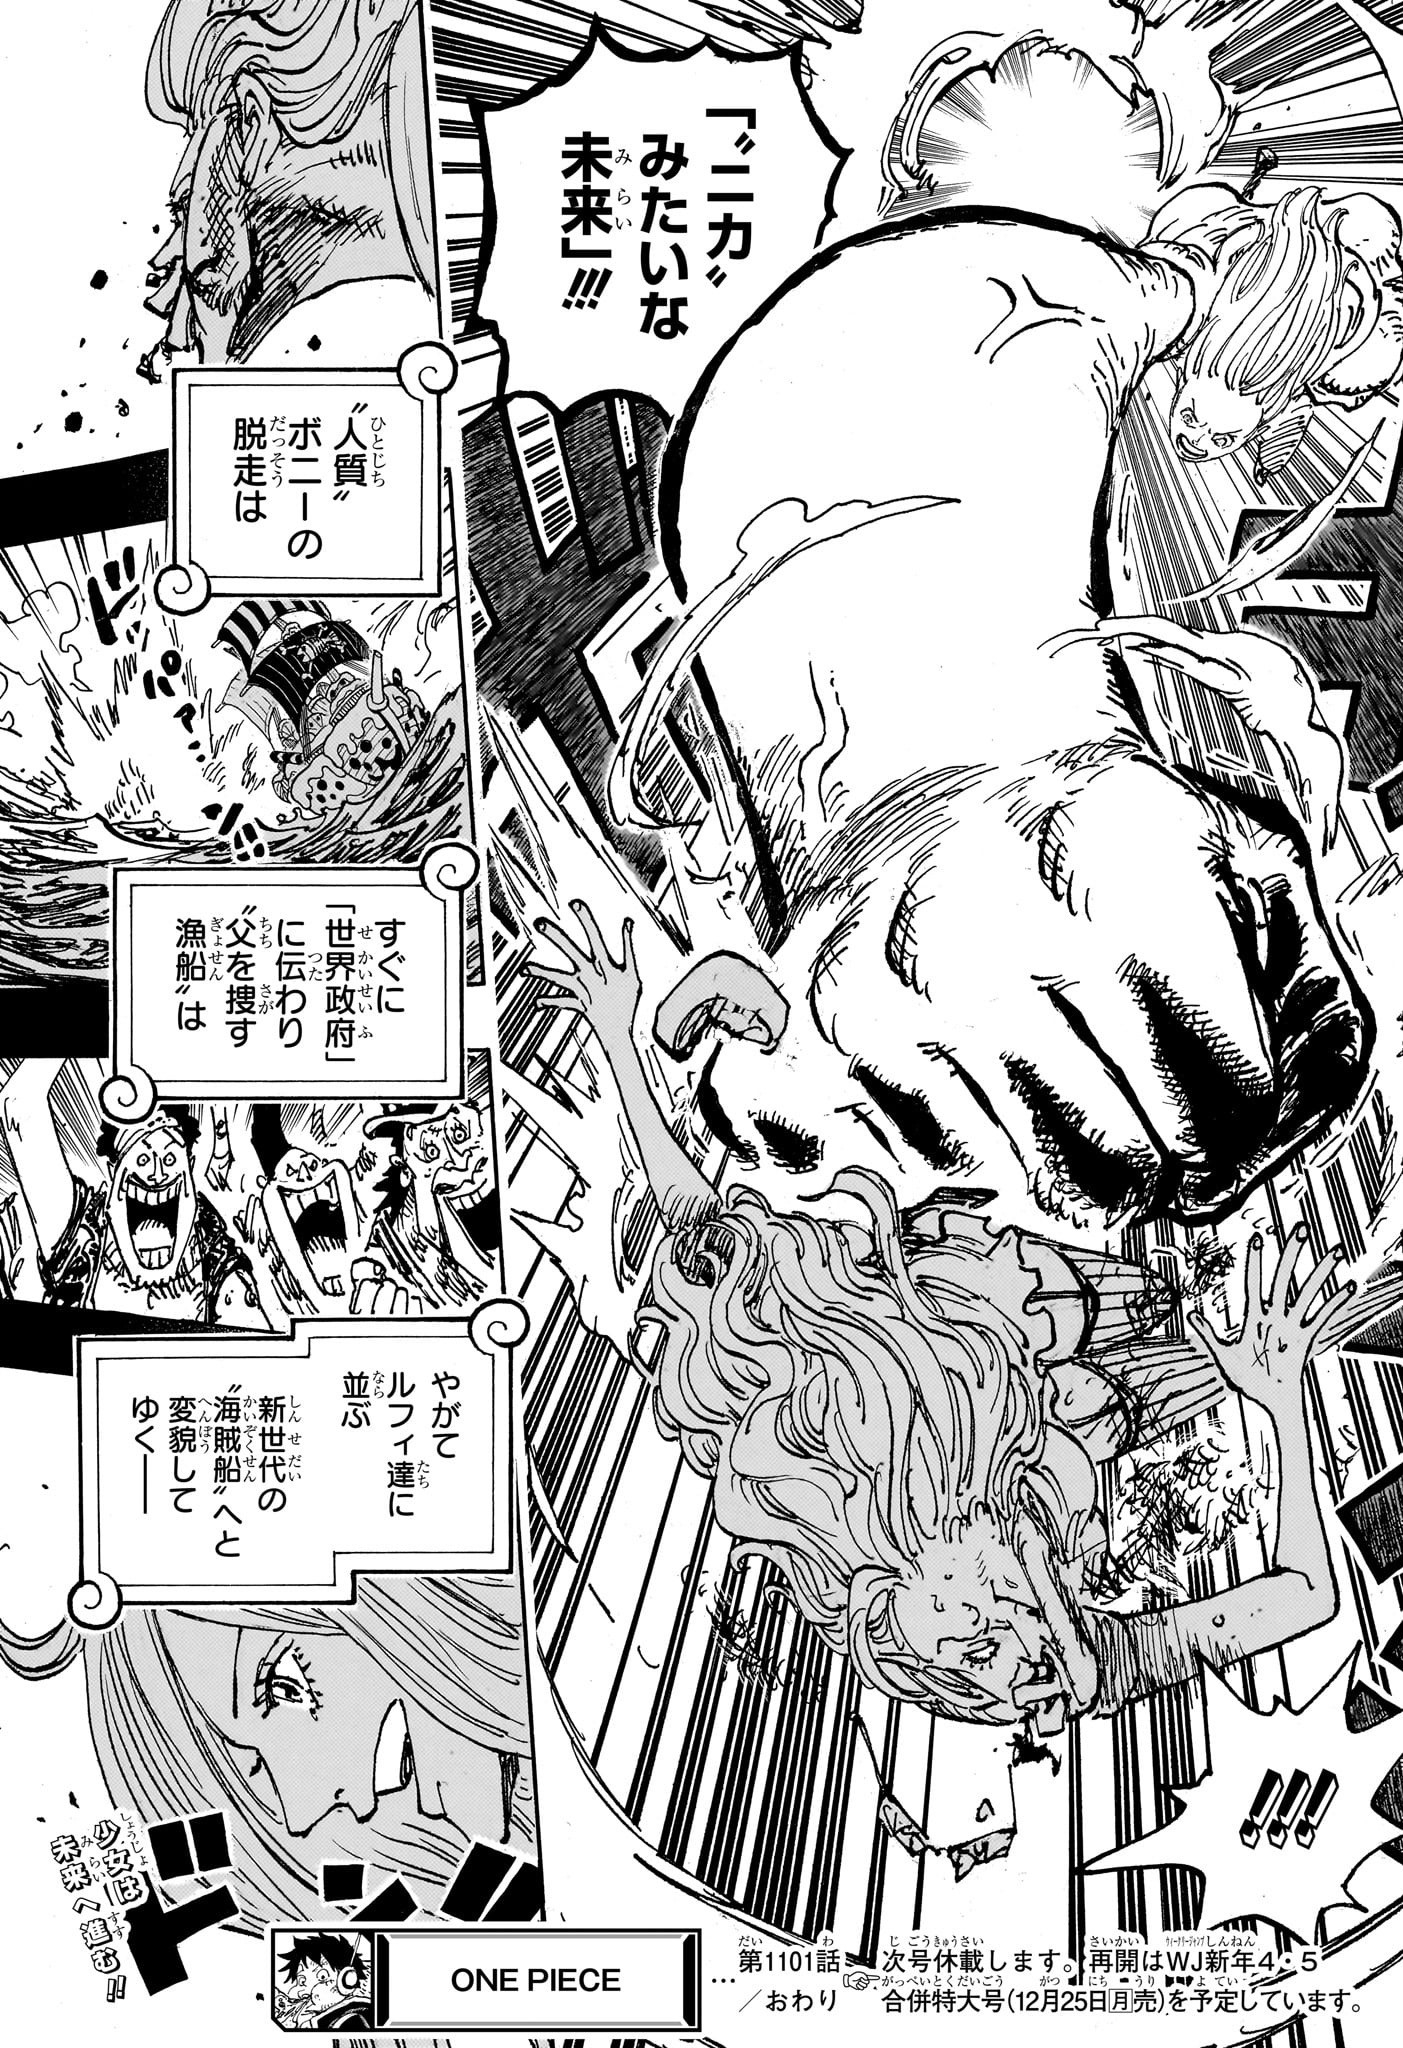 One Piece - Chapter 1101 - Page 15